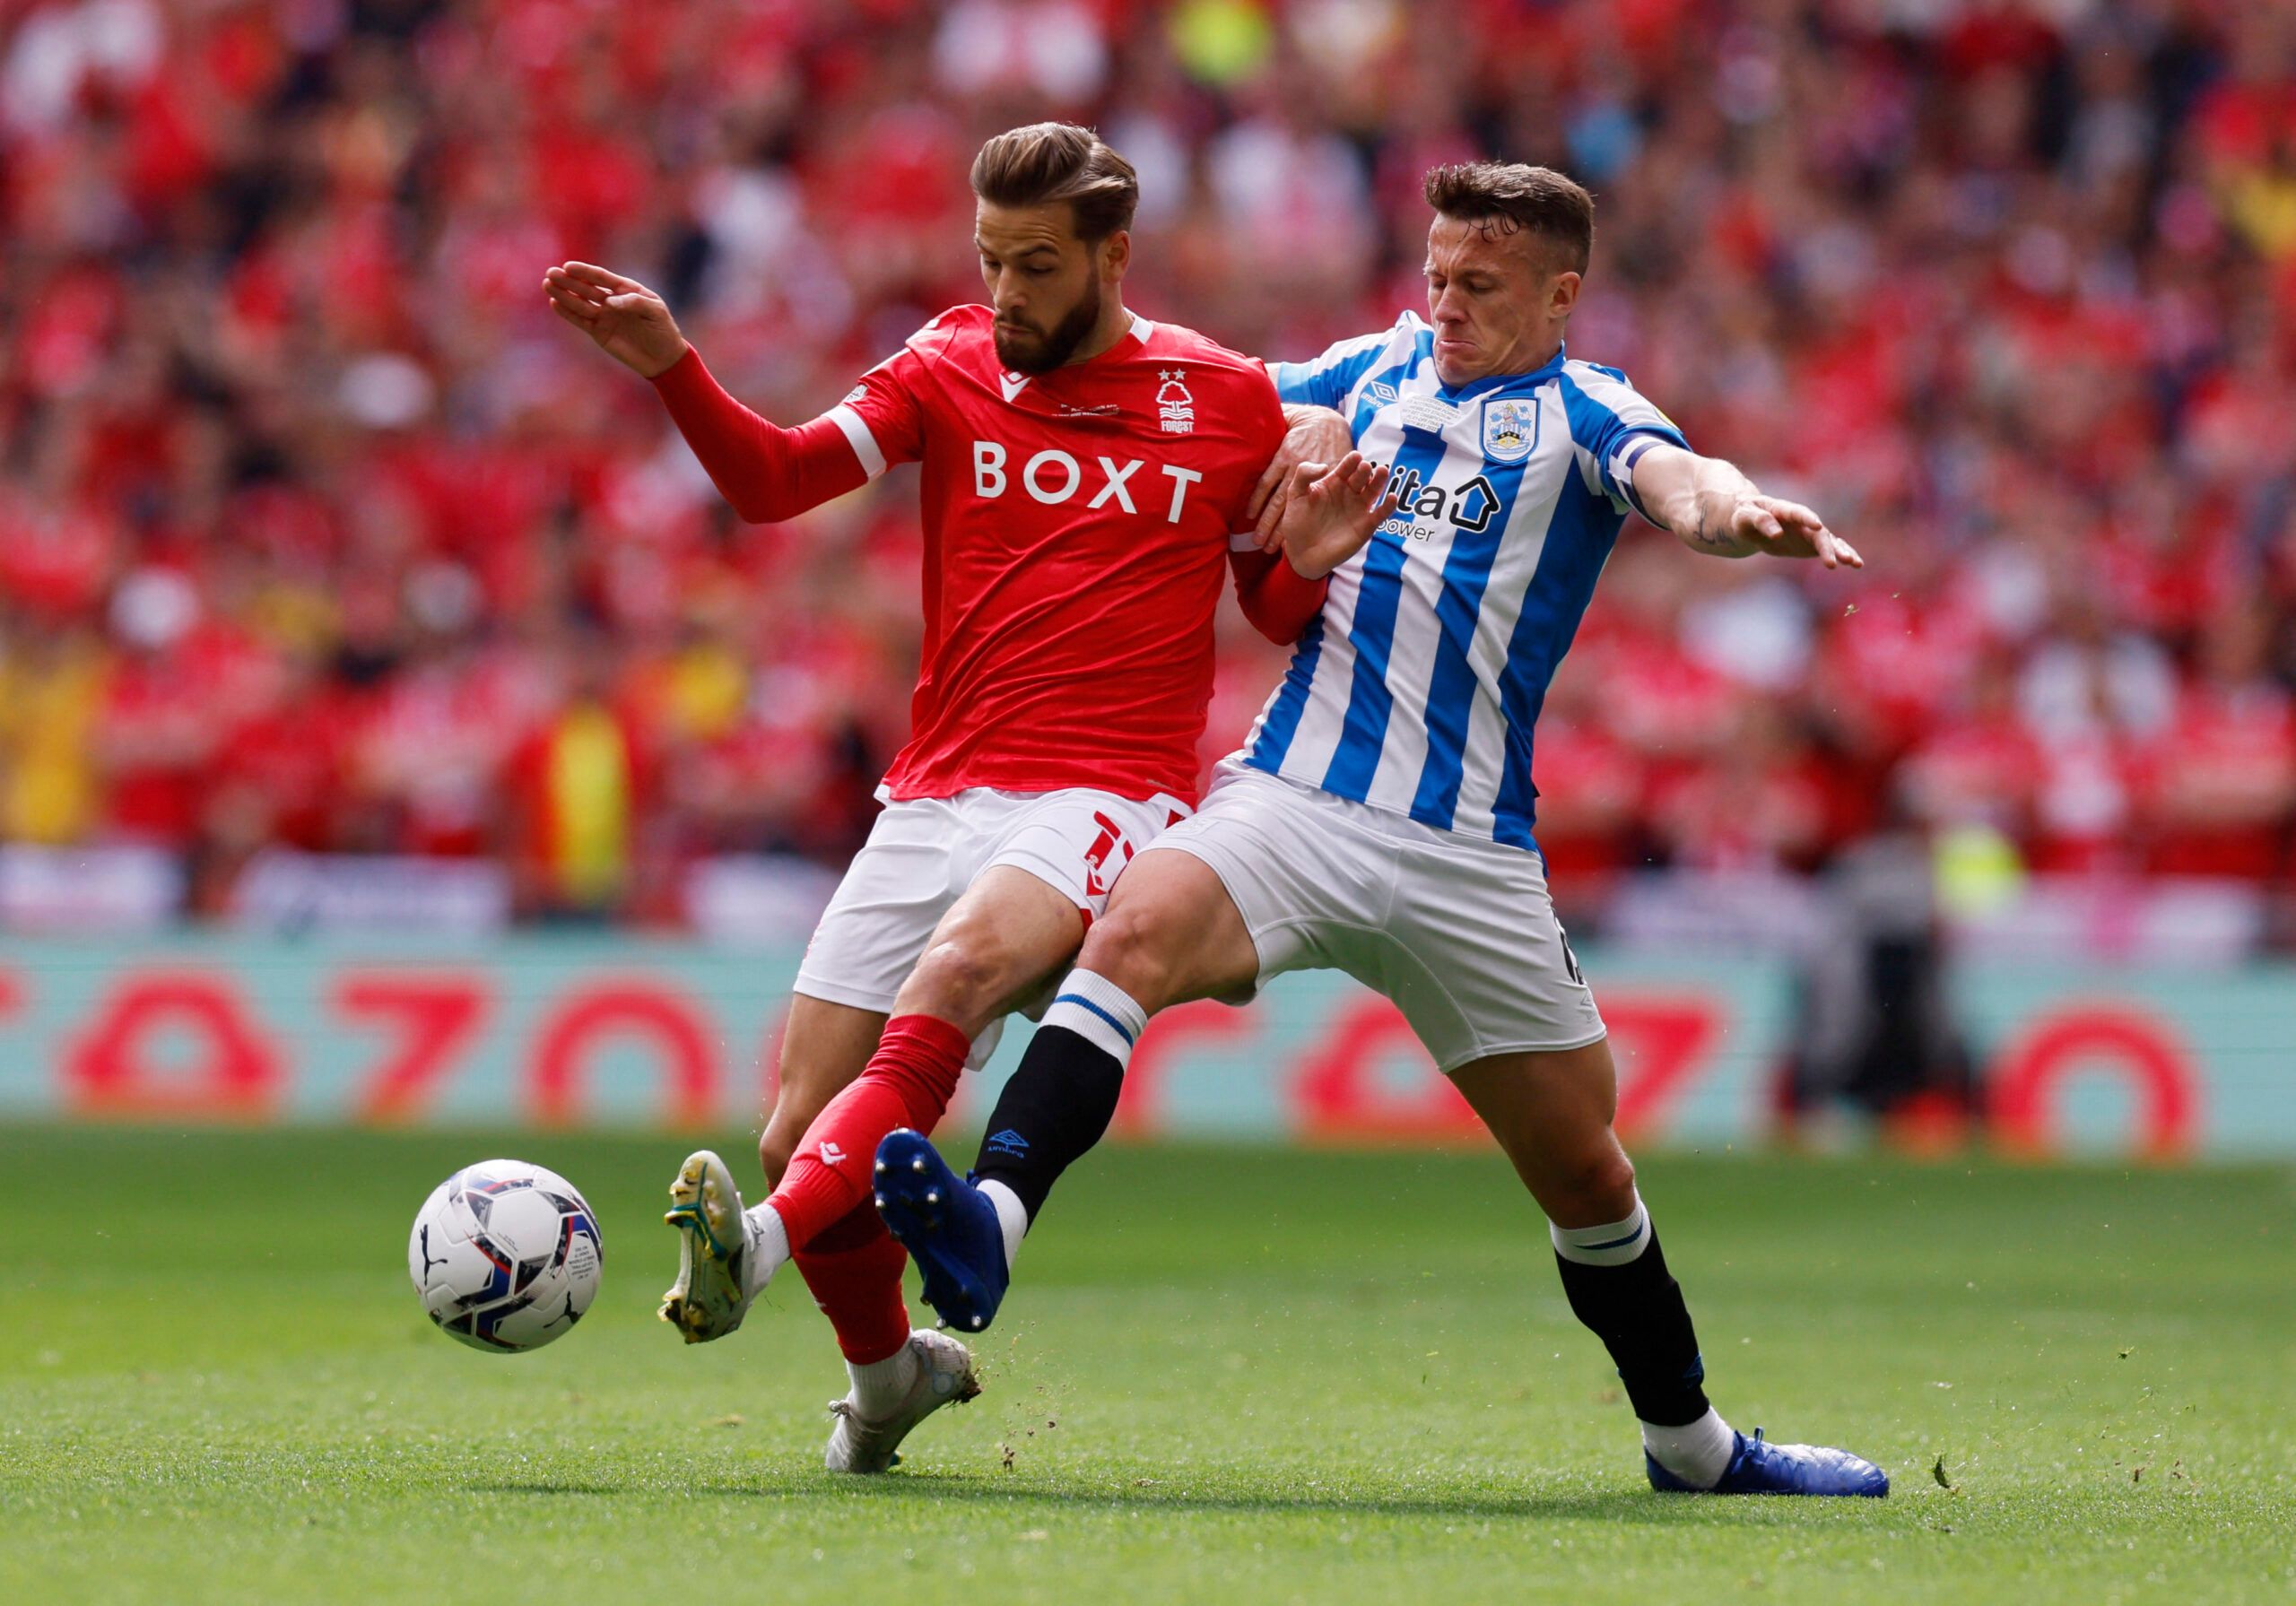 Soccer Football - Championship Play-Off Final - Huddersfield Town v Nottingham Forest - Wembley Stadium, London, Britain - May 29, 2022 Nottingham Forest's Philip Zinckernagel in action with Huddersfield Town's Jonathan Hogg Action Images via Reuters/Andrew Couldridge